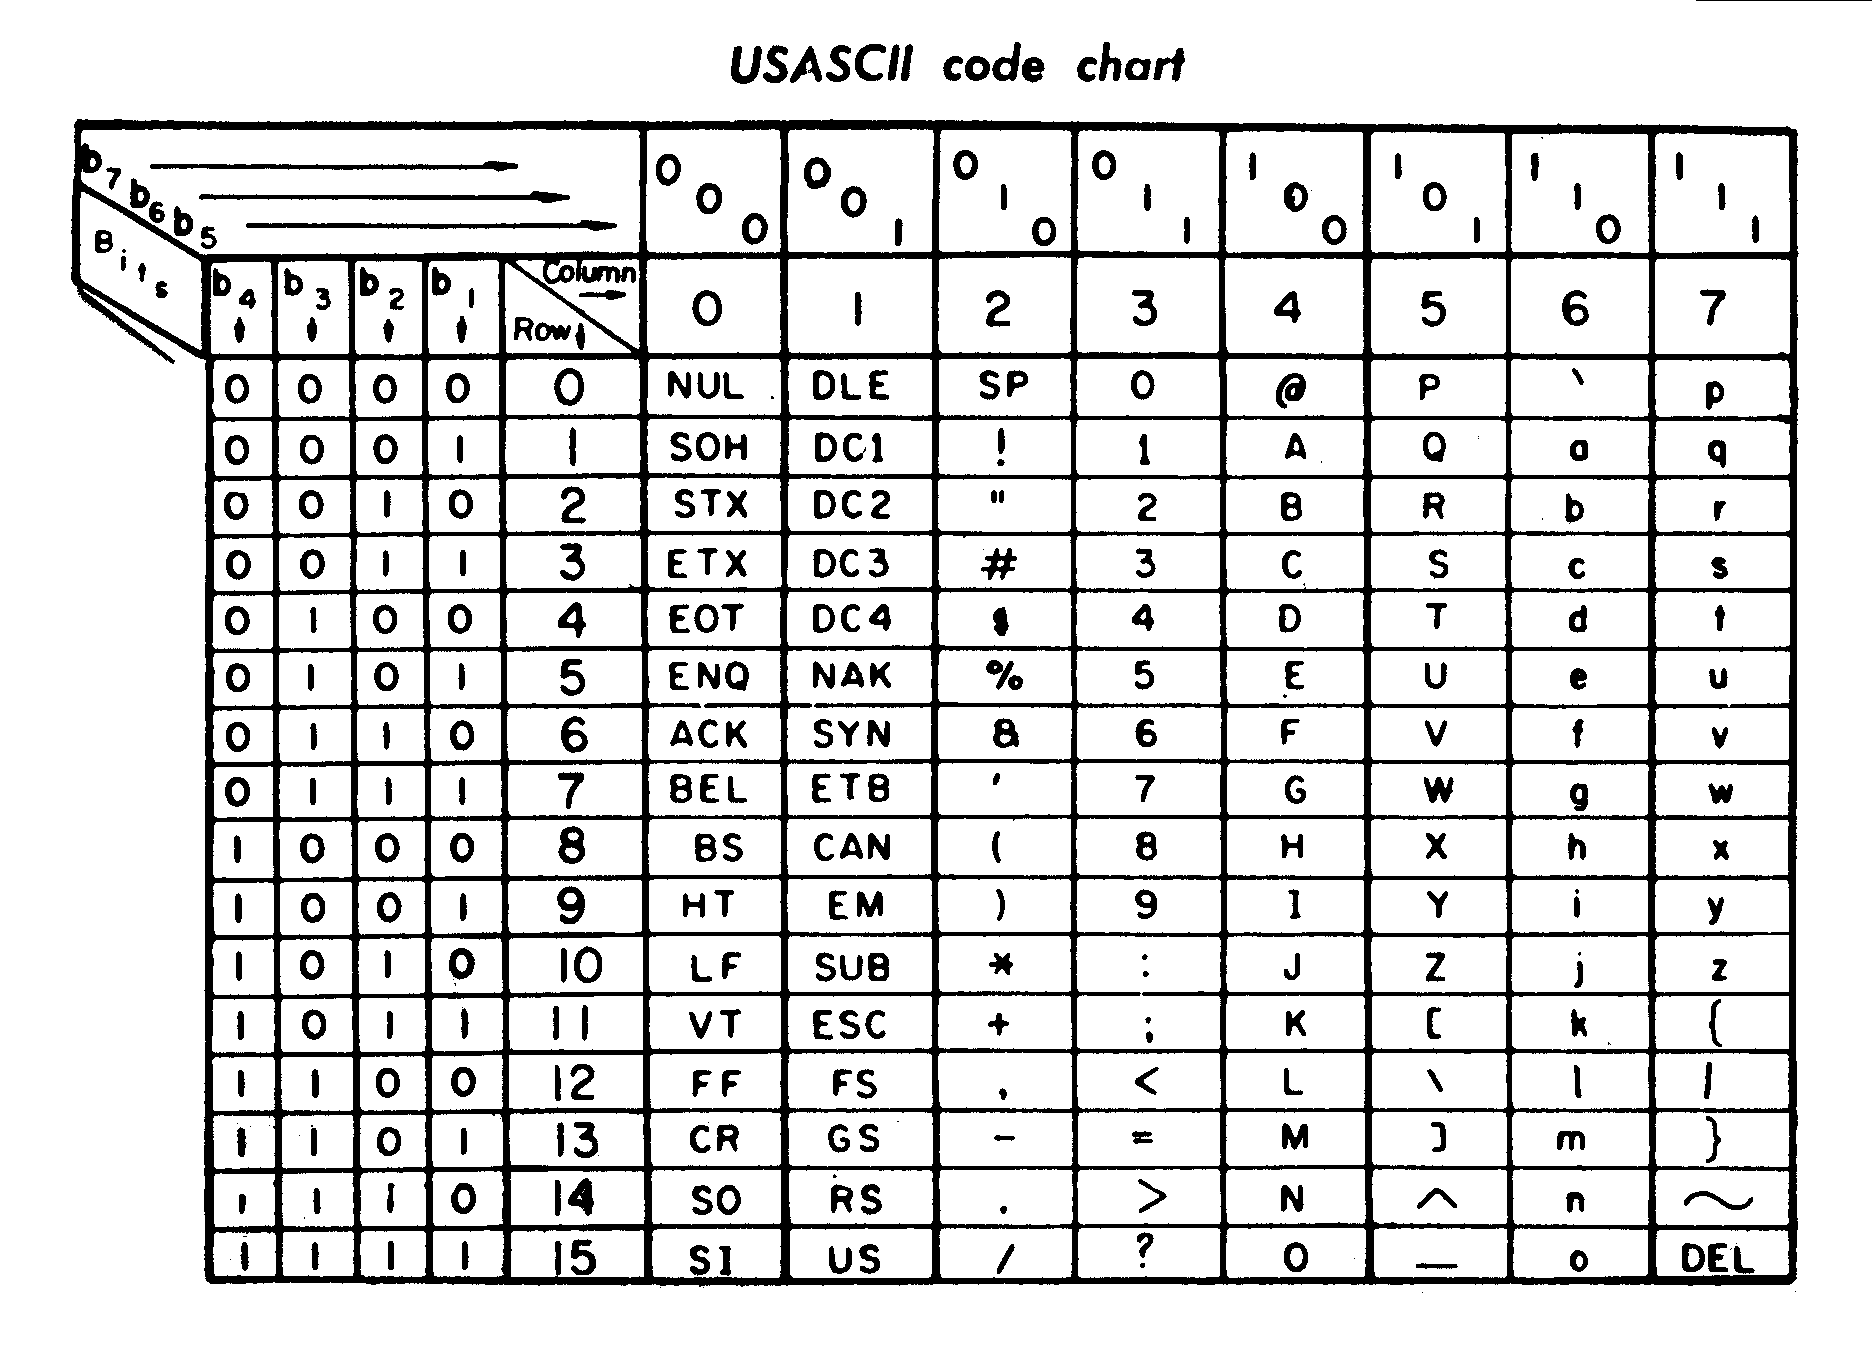 ASII code chart quick reference card.